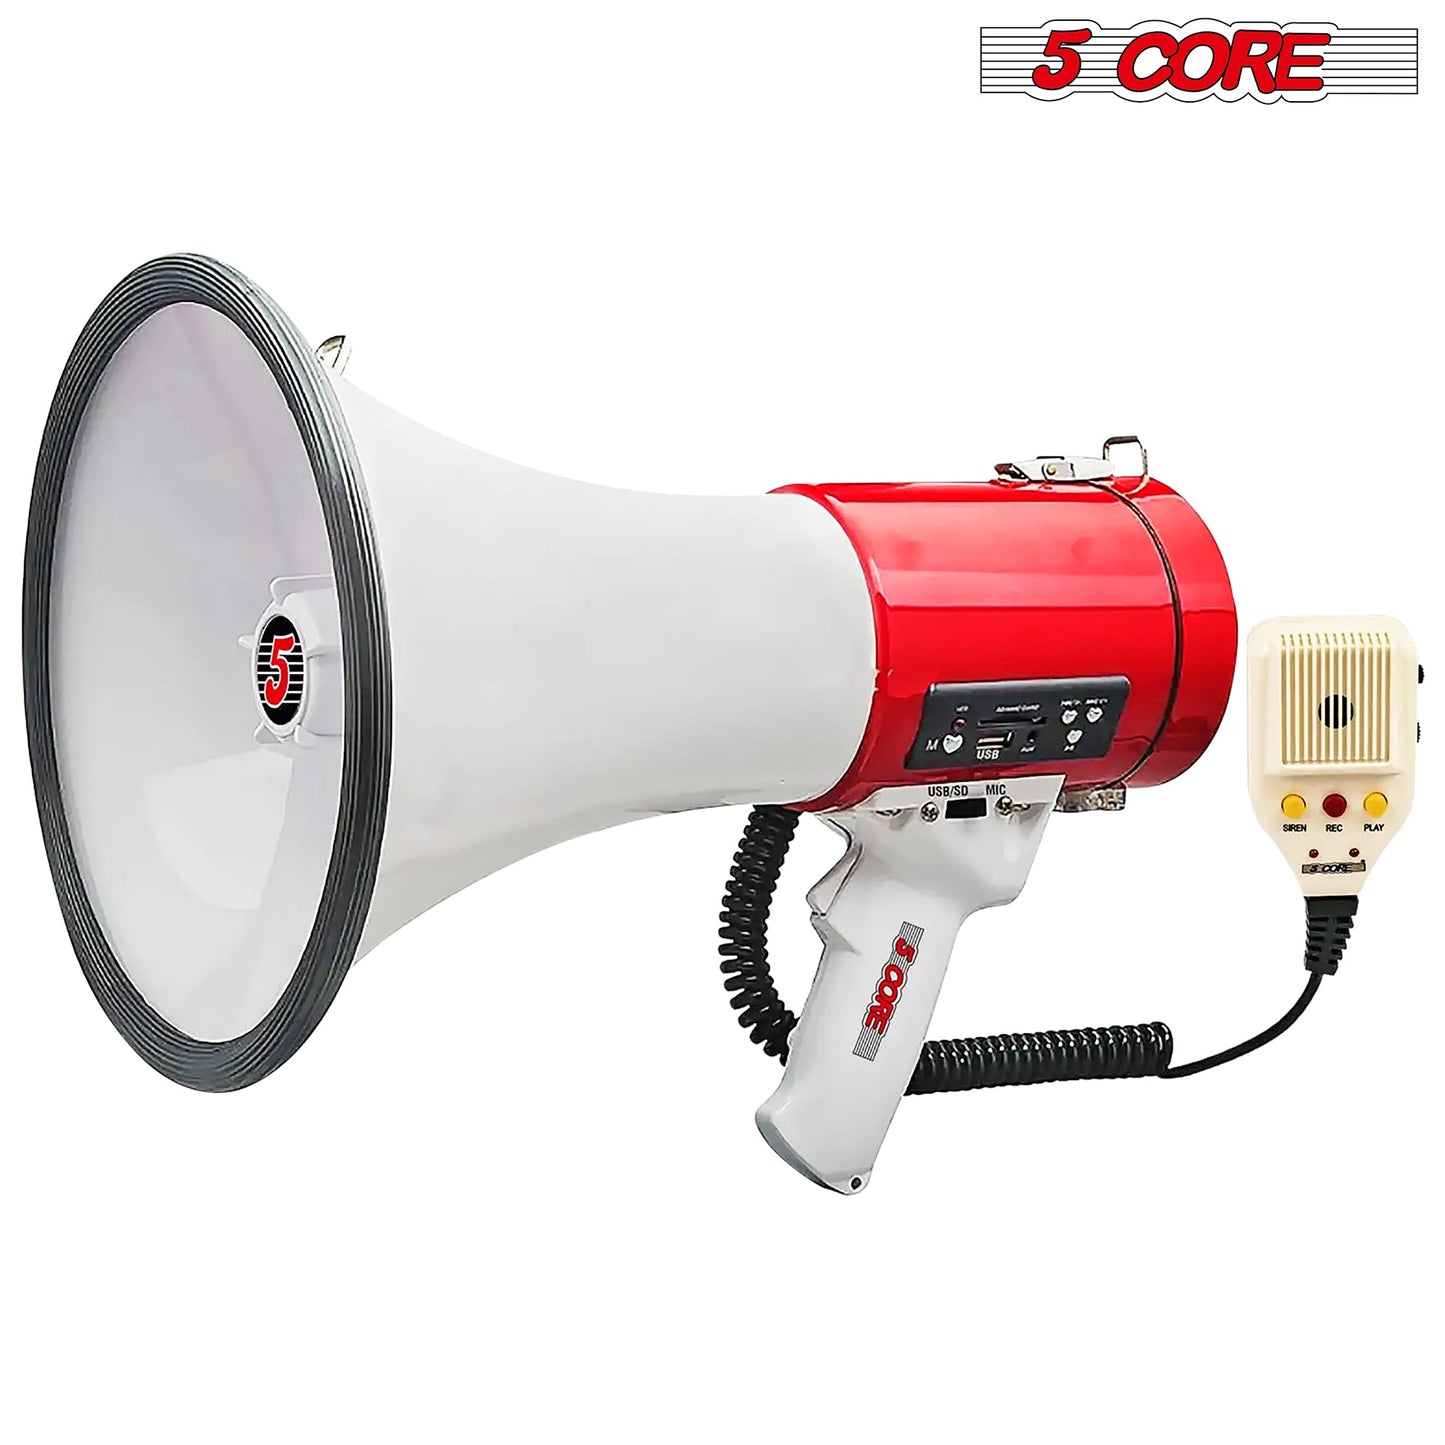 Megaphone Speaker| 25W Bullhorn Clear & Far Reaching Sound- Multi-Function with REC, Siren, Volume Control |AUX, USB, SD Input| Handheld Mic with ergonomic Grip| for Indoor & Outdoor Use- 66SF